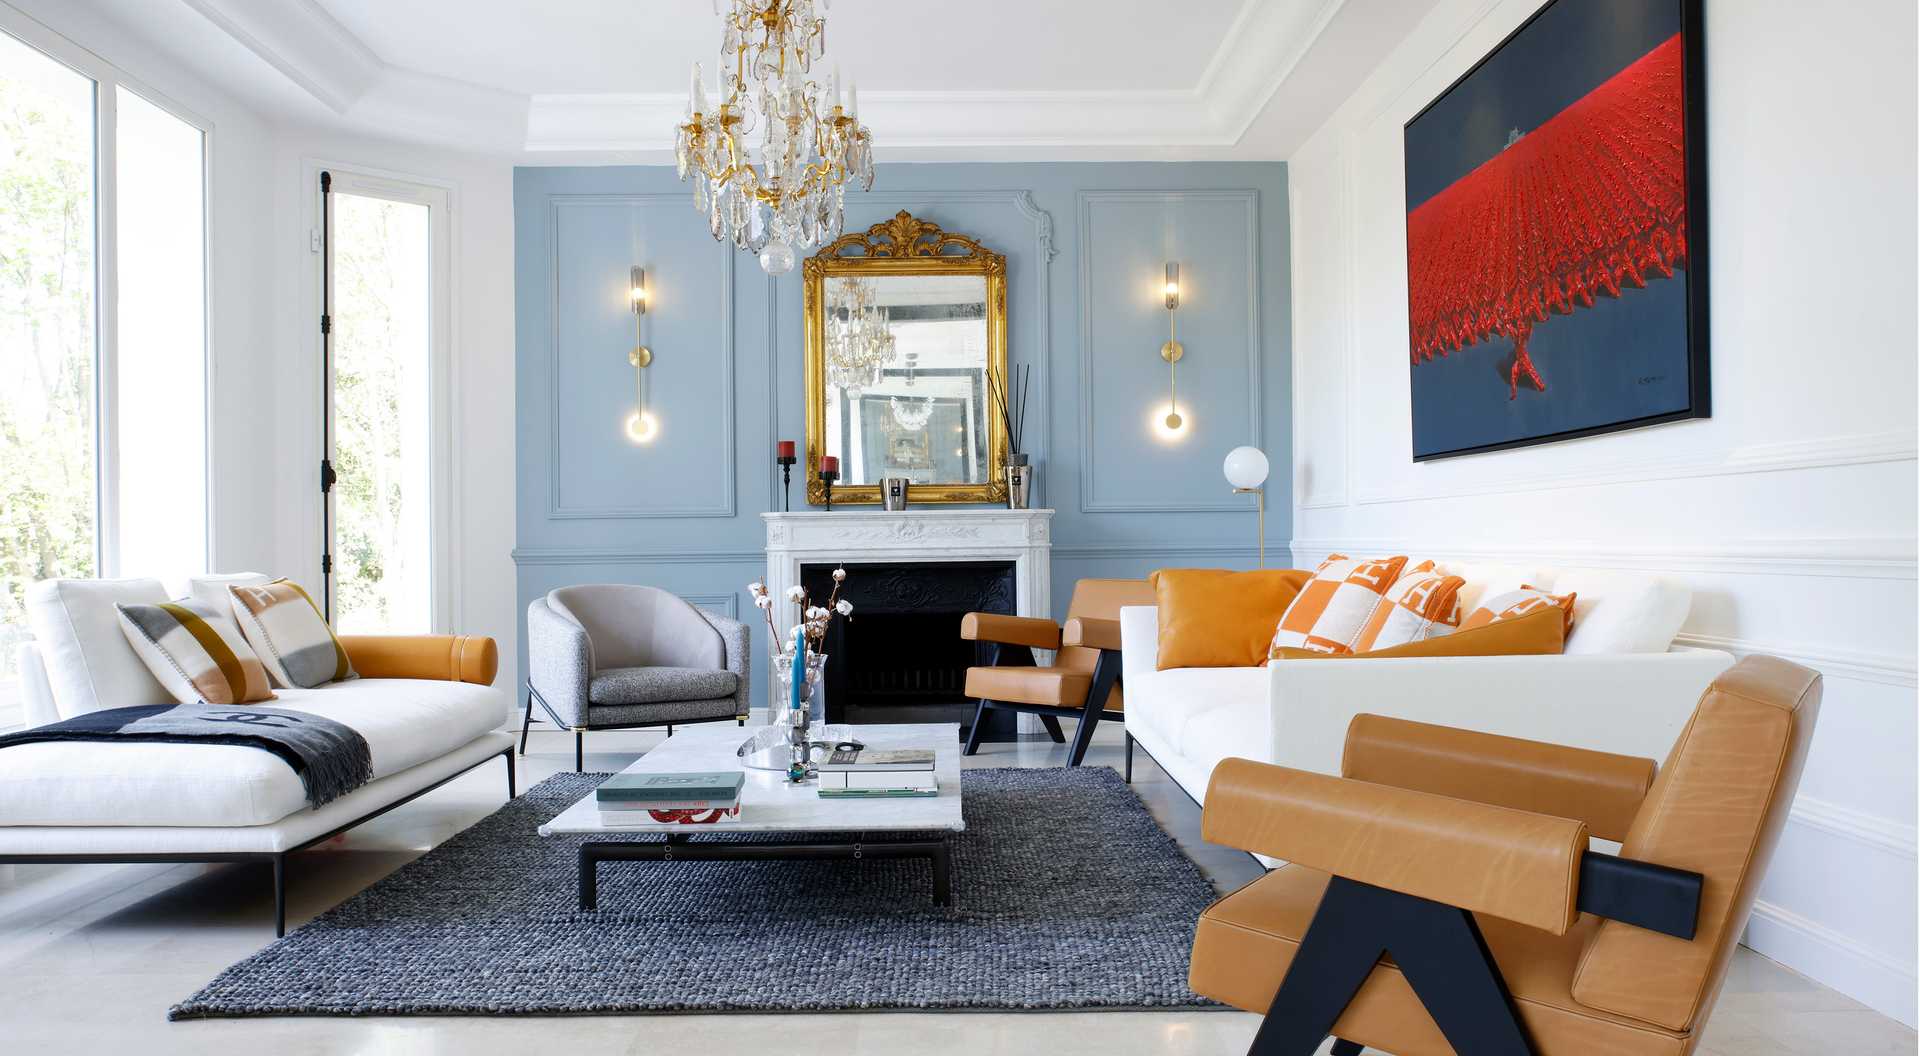 Interior makeover of an apartment by an interior designer in Lyon